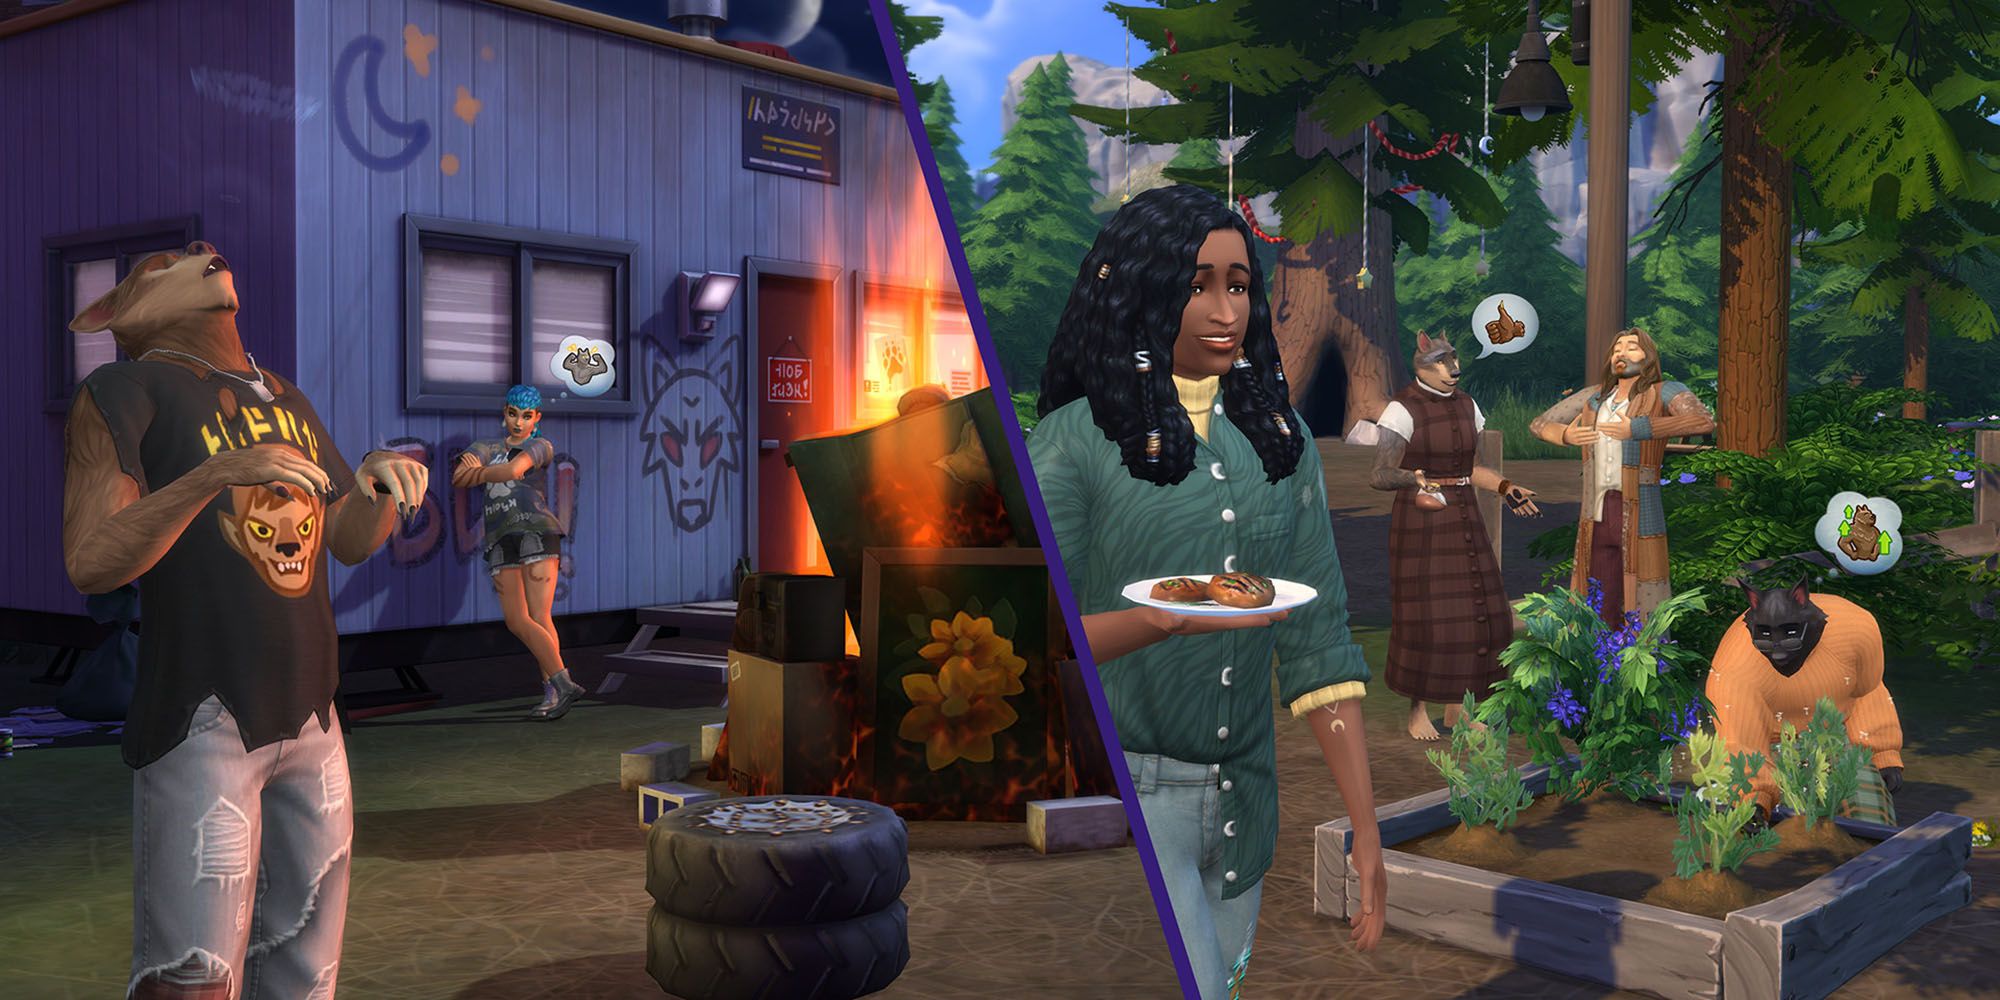 The Wildfangs and Moonwood Collective in The Sims 4